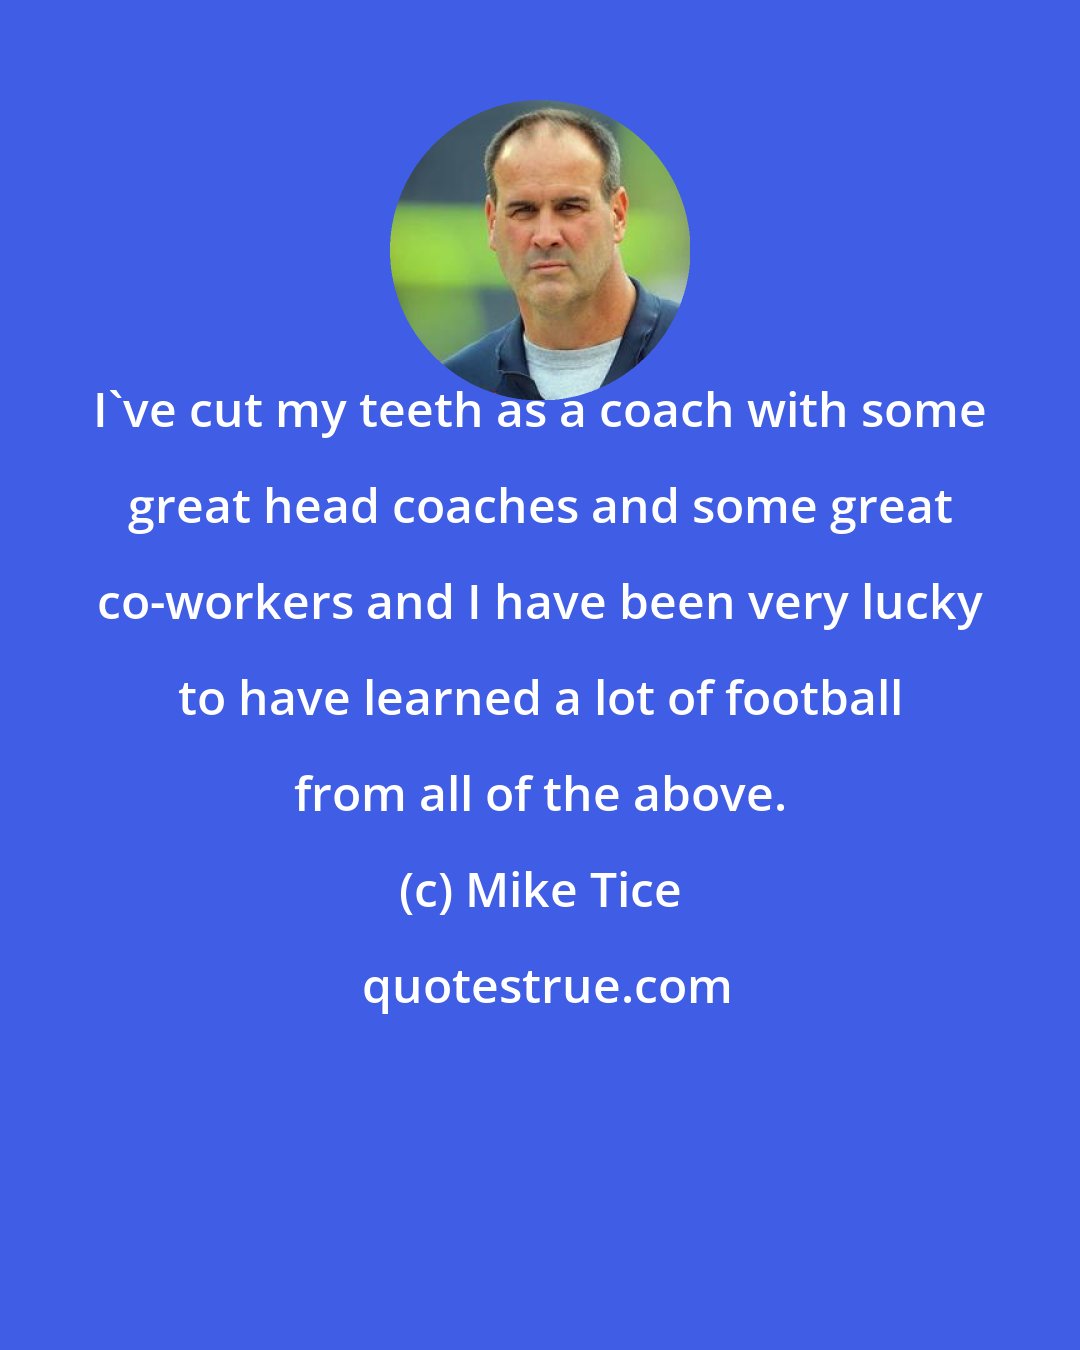 Mike Tice: I've cut my teeth as a coach with some great head coaches and some great co-workers and I have been very lucky to have learned a lot of football from all of the above.